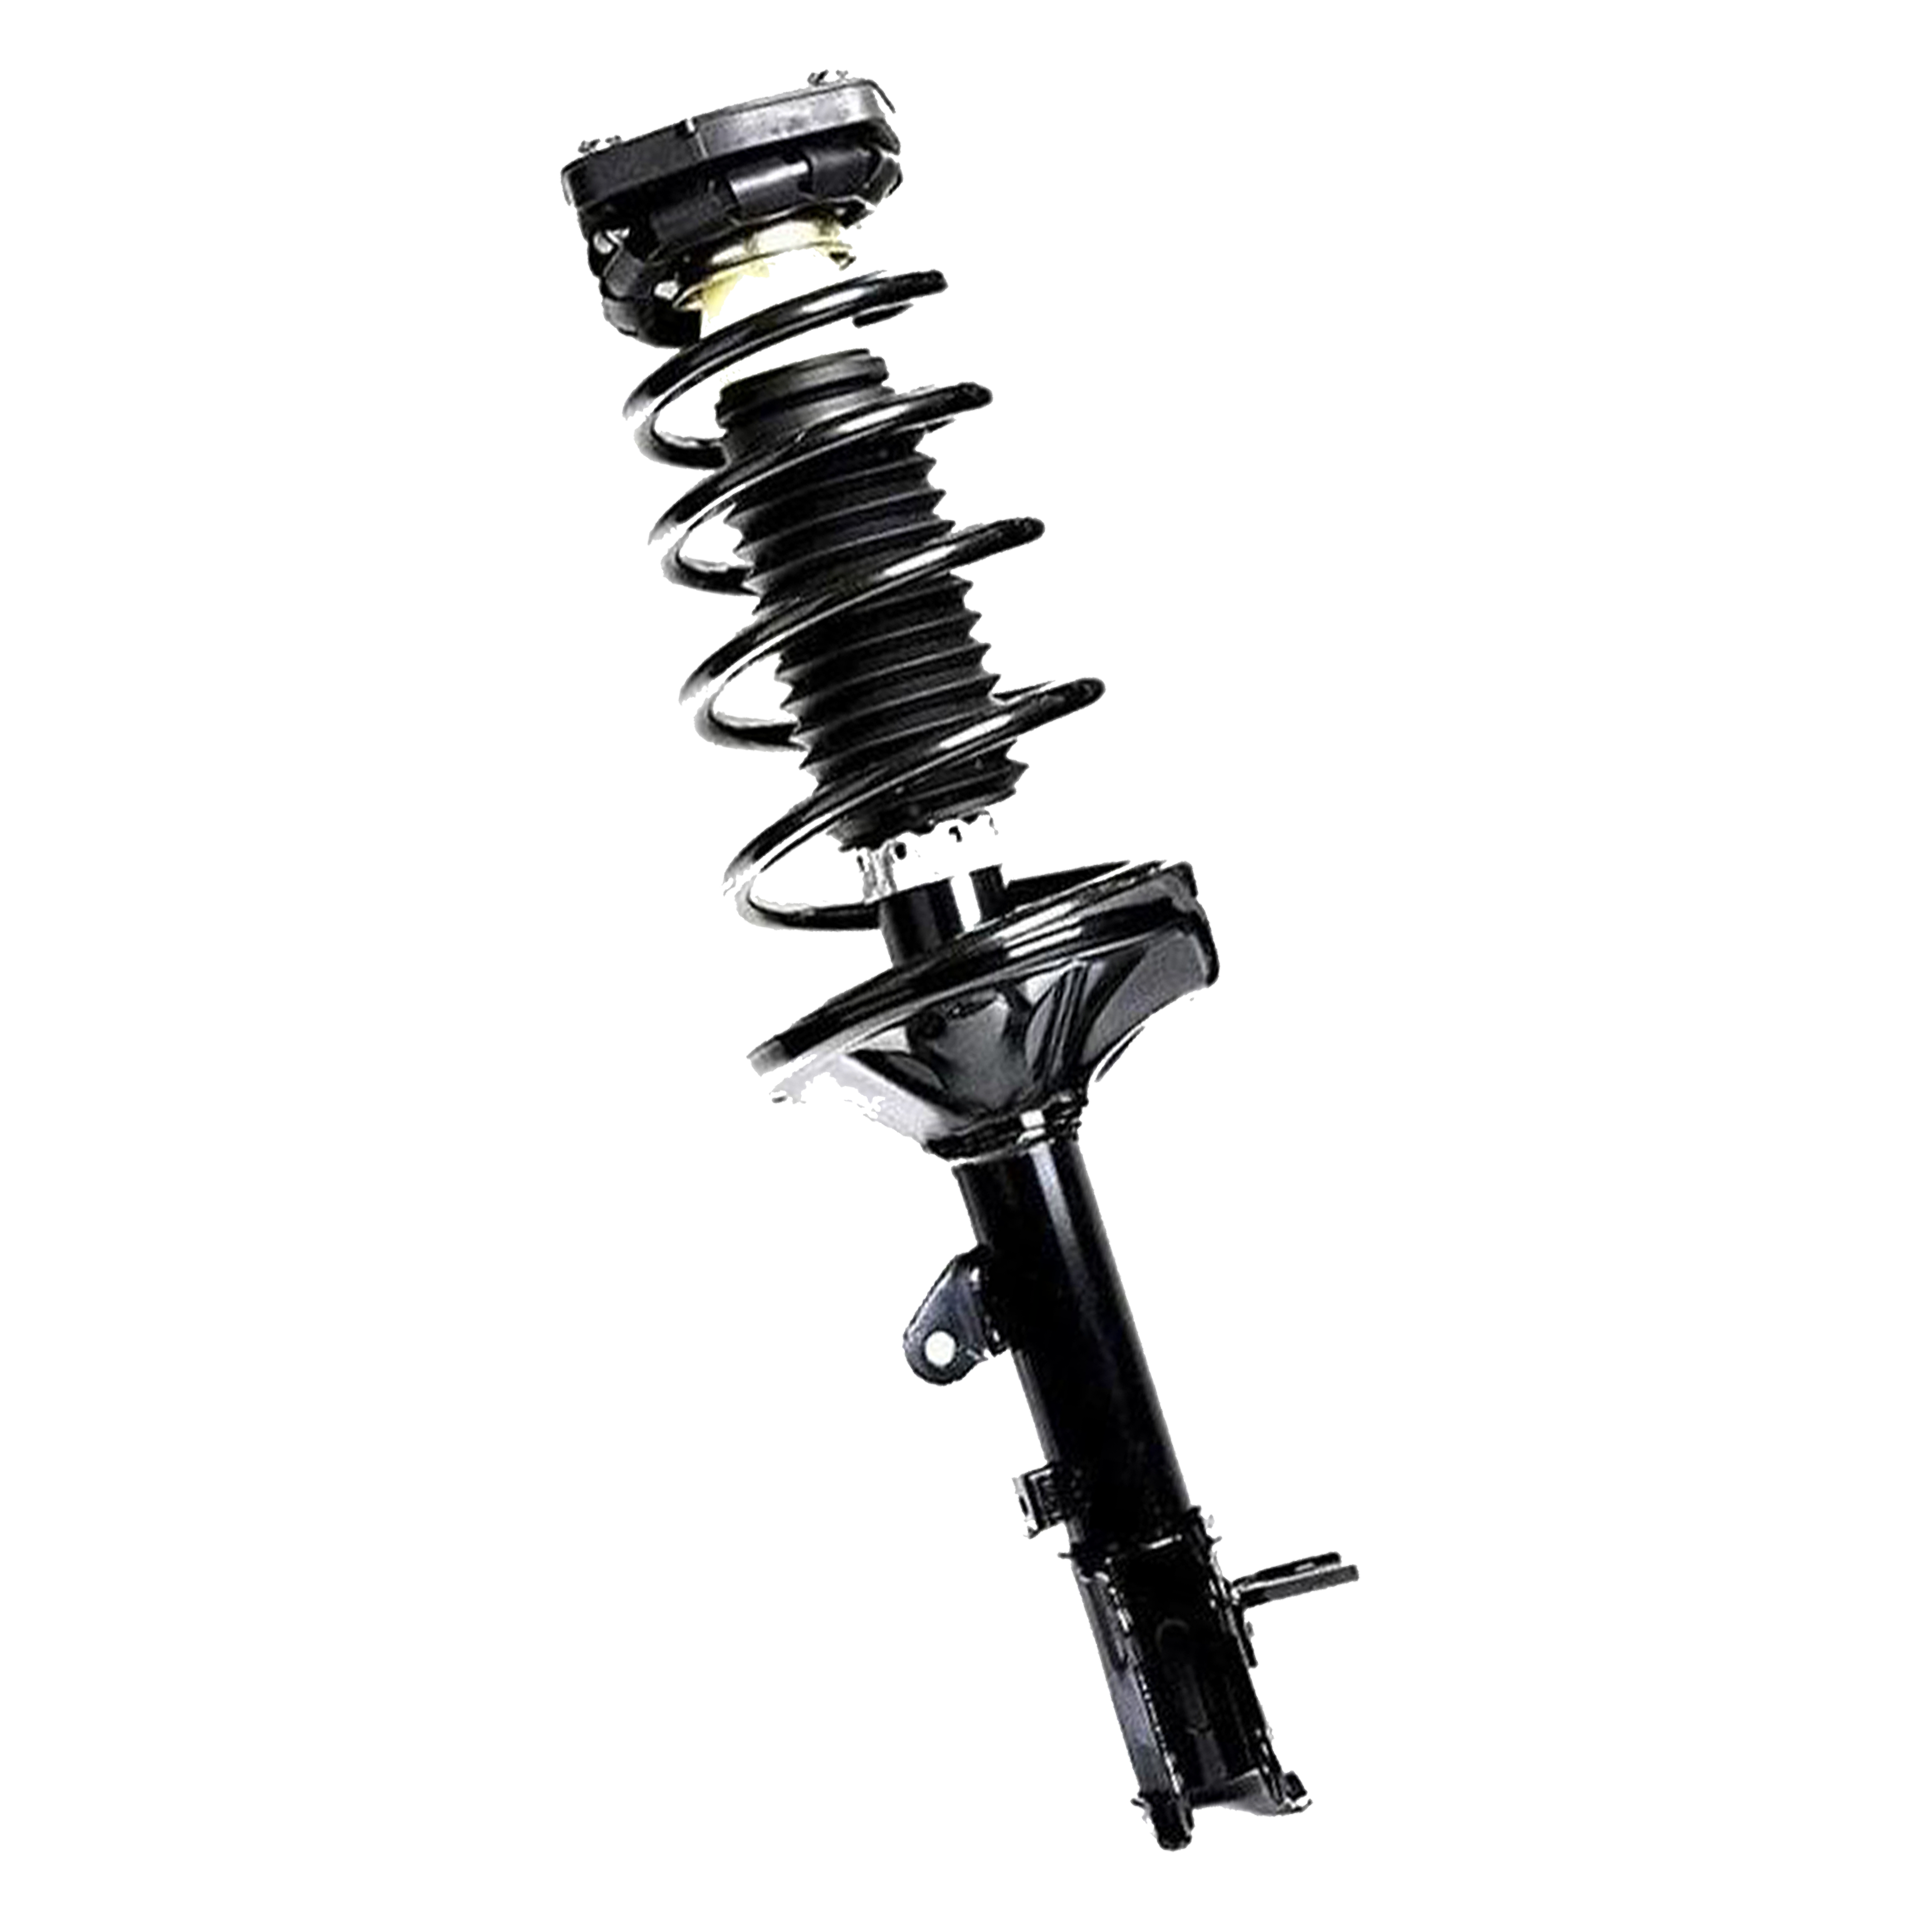 Shoxtec Rear Complete Struts assembly for 2000 - 2006 Hyundai Elantra 2.0L I4 Coil Spring Assembly Shock Absorber Repl. Part no. 171406 171407 - image 3 of 7